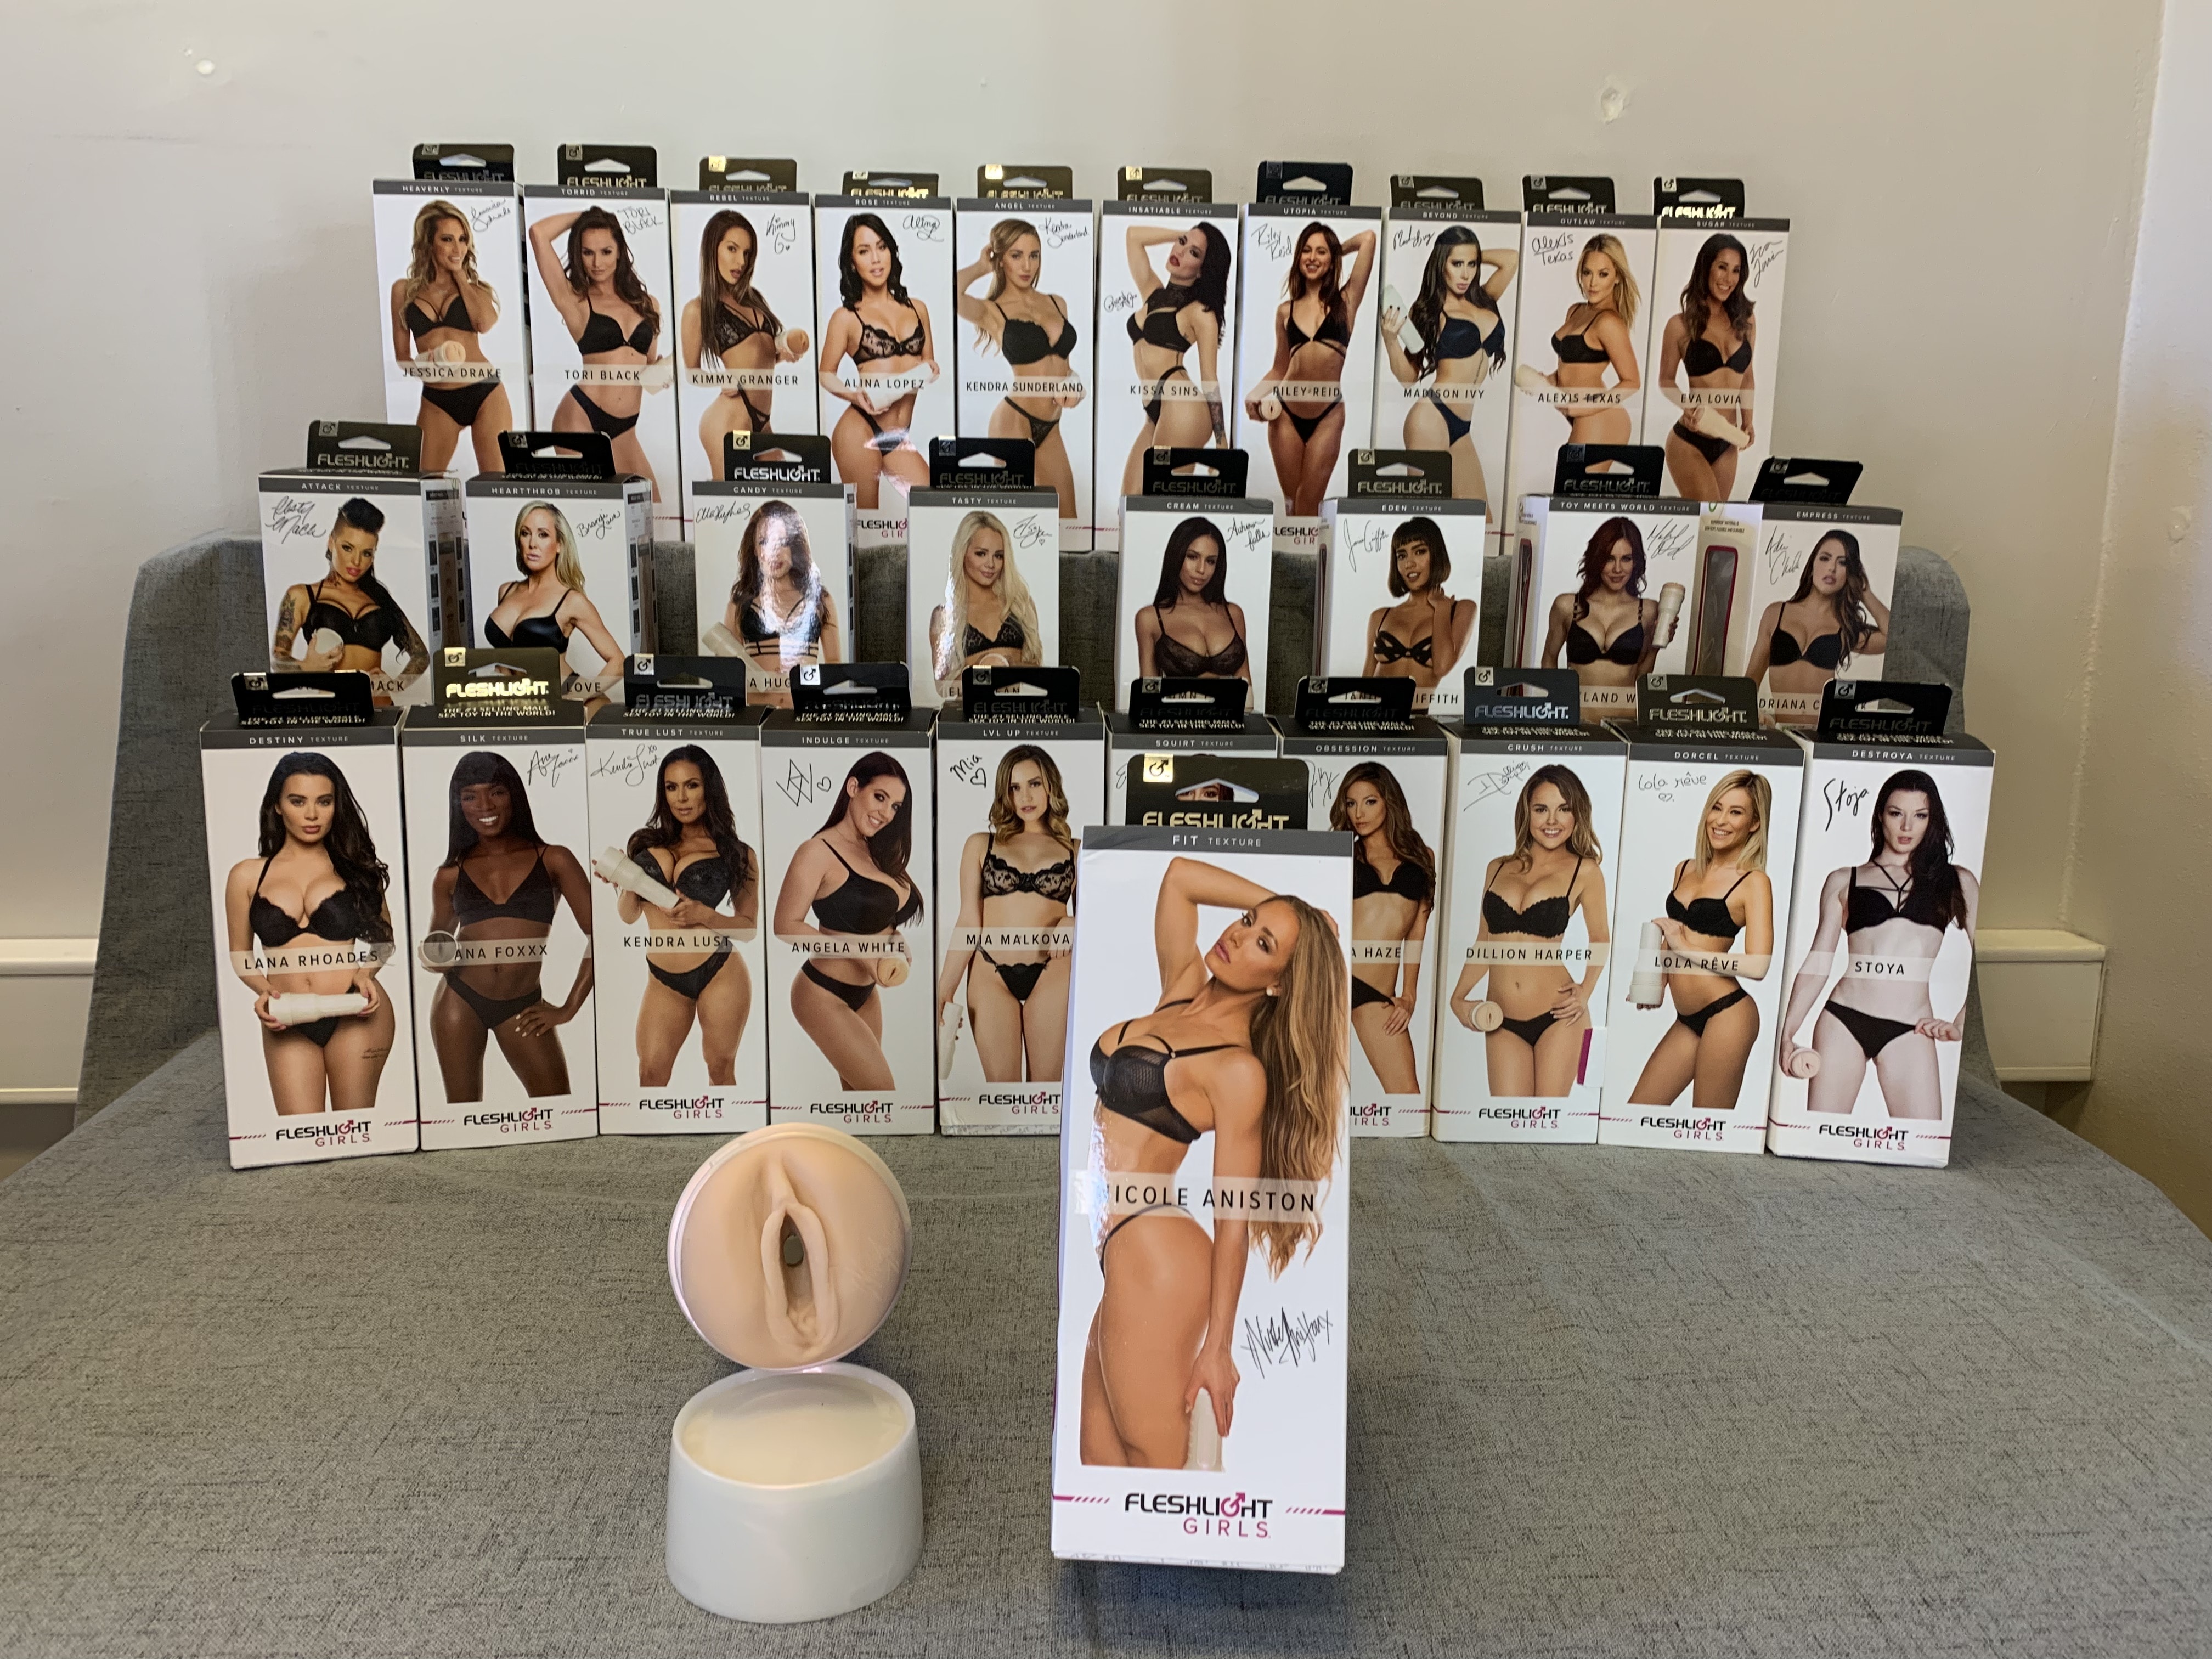 My Personal Experiences with Nicole Aniston Fleshlight Fit